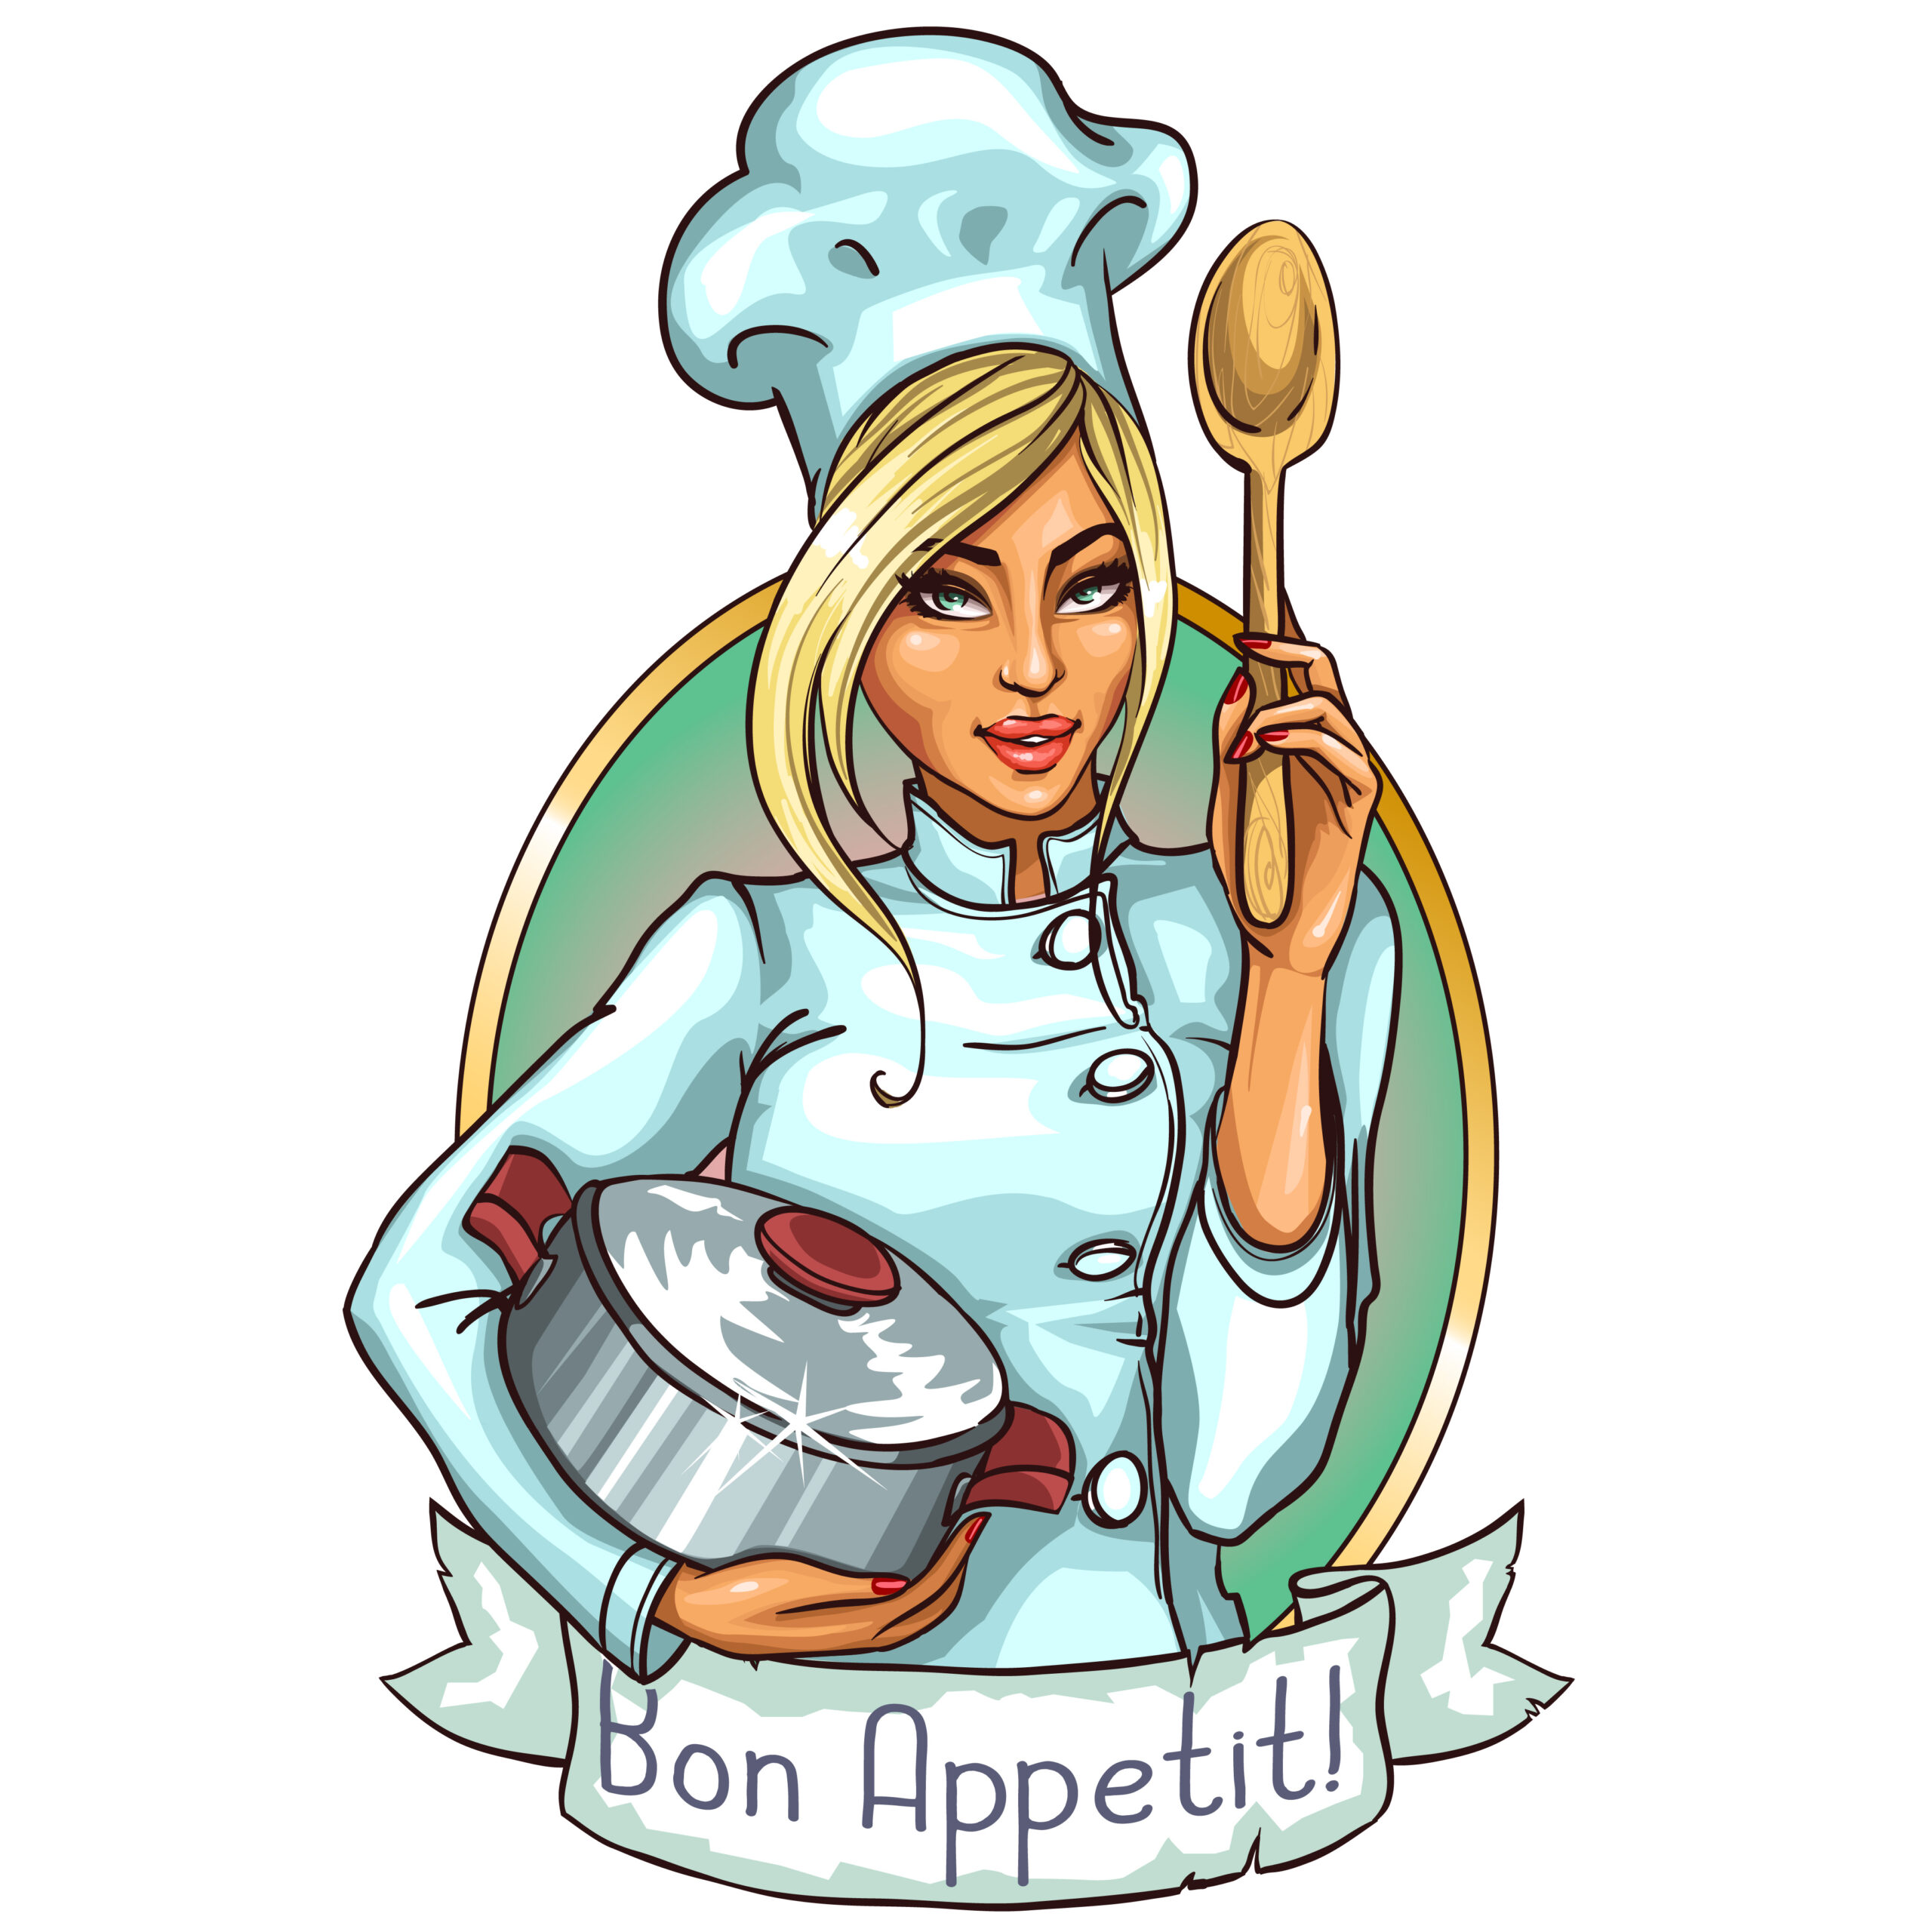 Pretty Chef with sparkling clean pot and wood spoon cartoon image